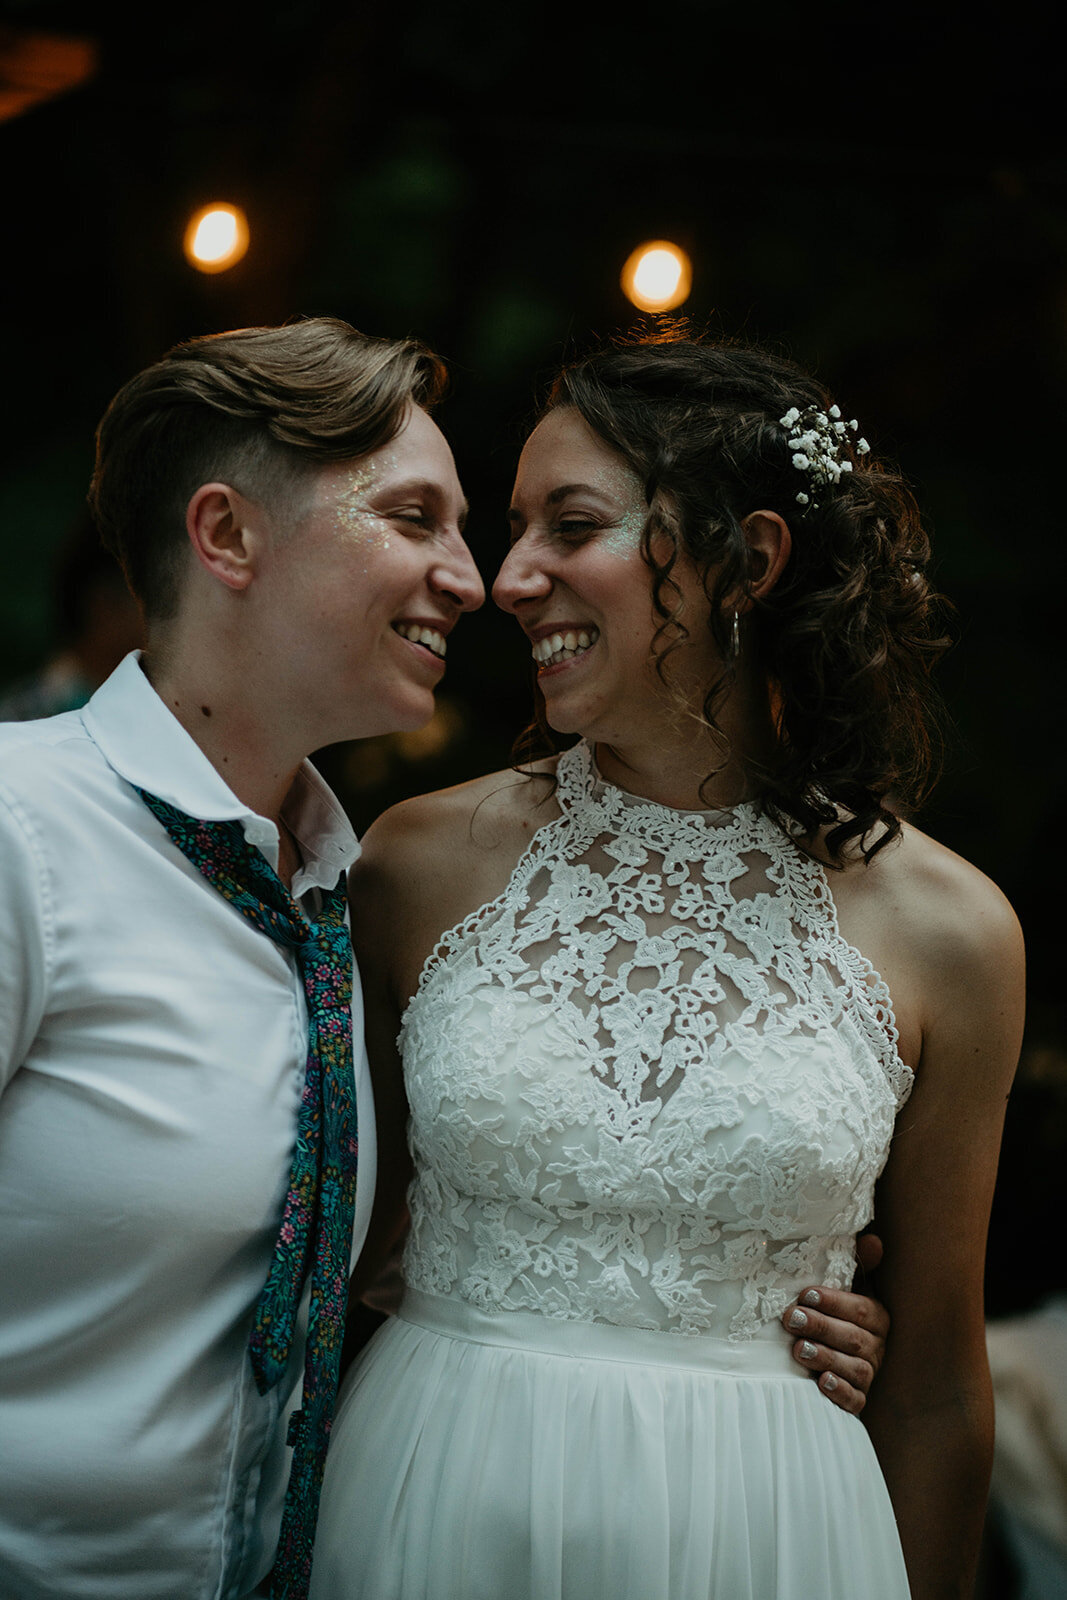 LGBTQ couple smiling at each other during their reception at Leach Botanical Garden